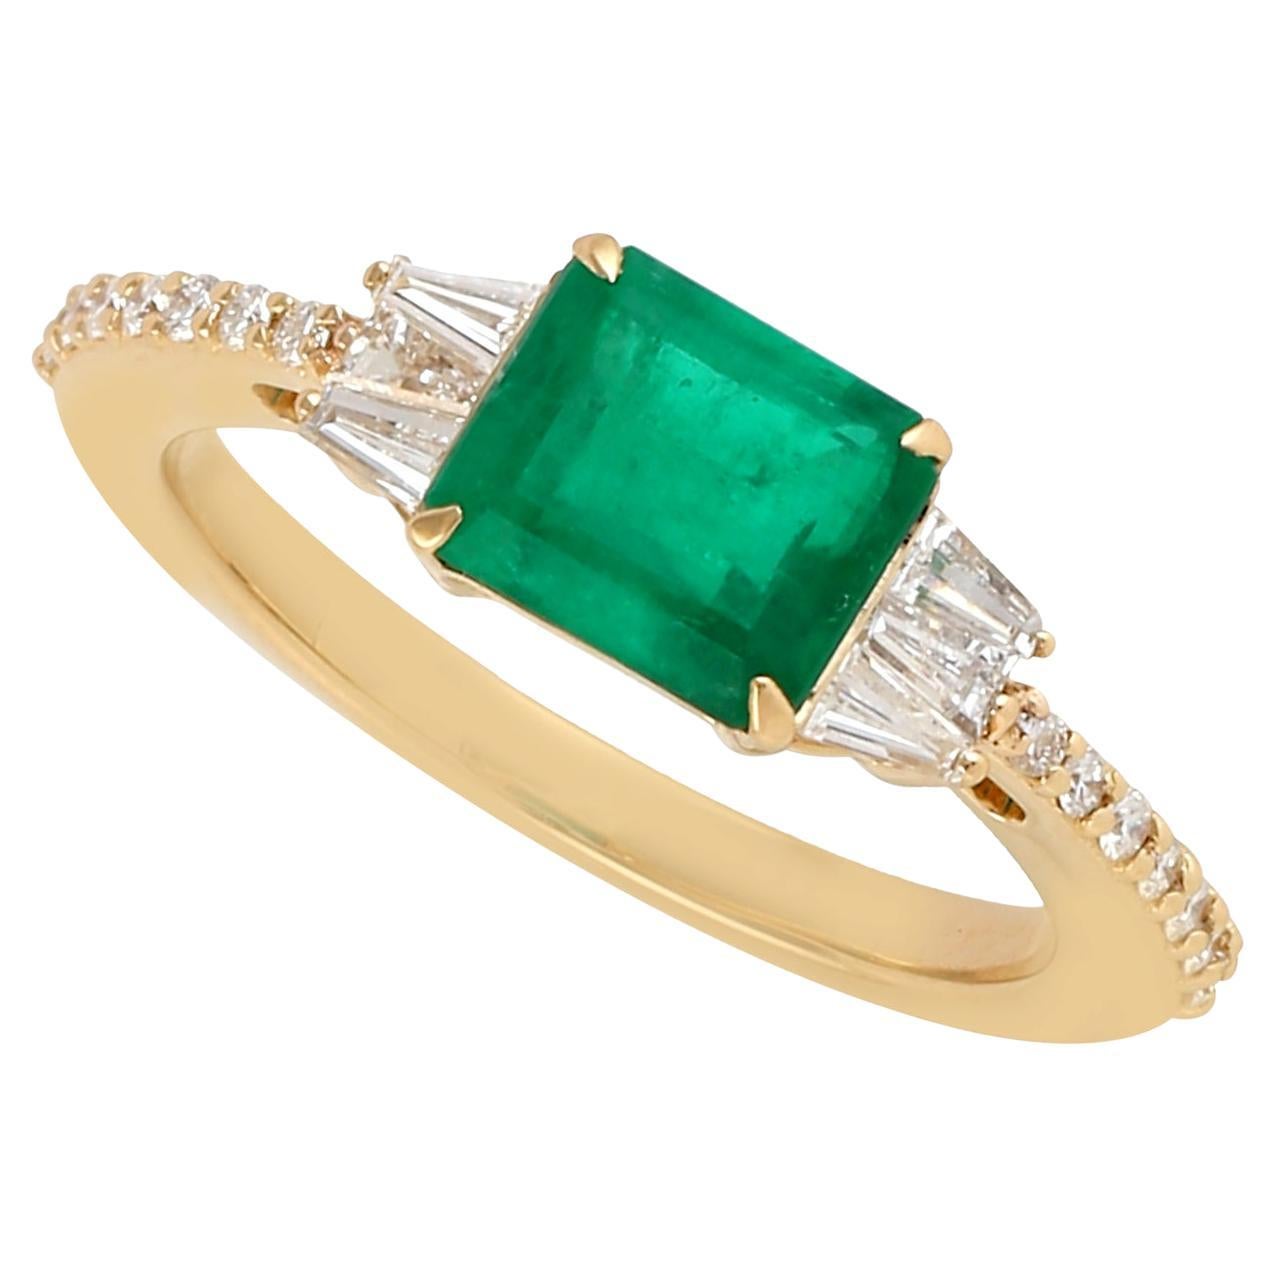 Emerald Ring with Pave Diamonds Made in 18k Yellow Gold